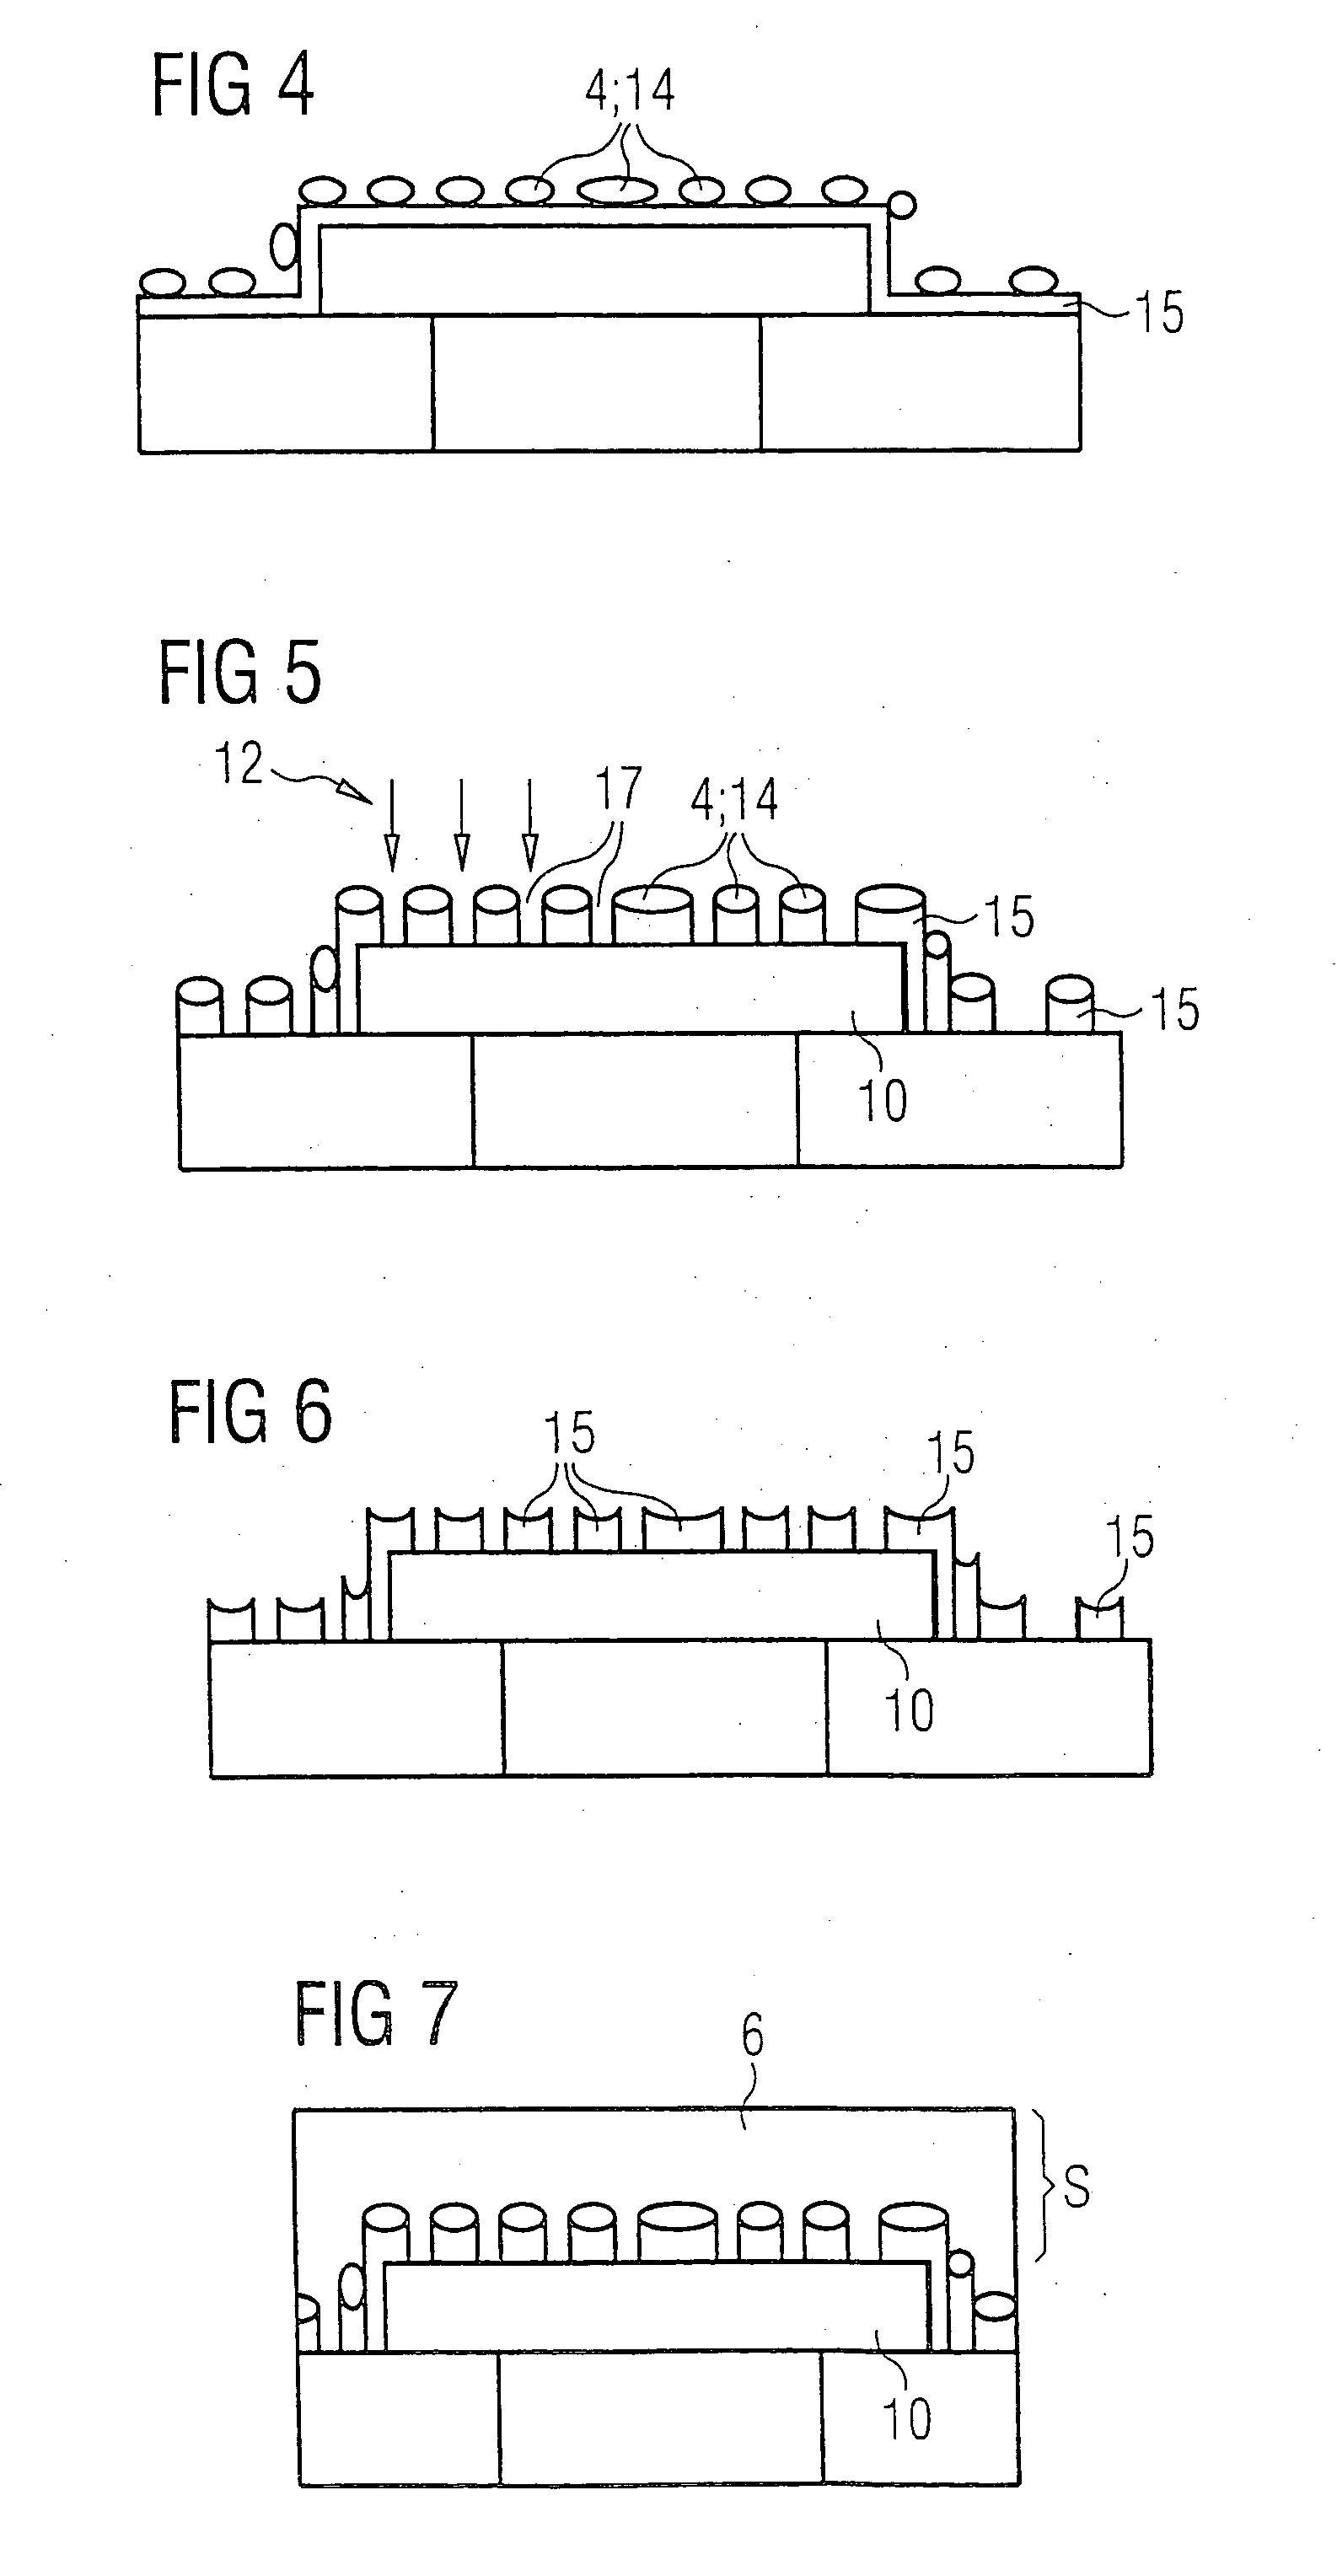 Intergrated semiconductor memory and method for producing an integrated semiconductor memory